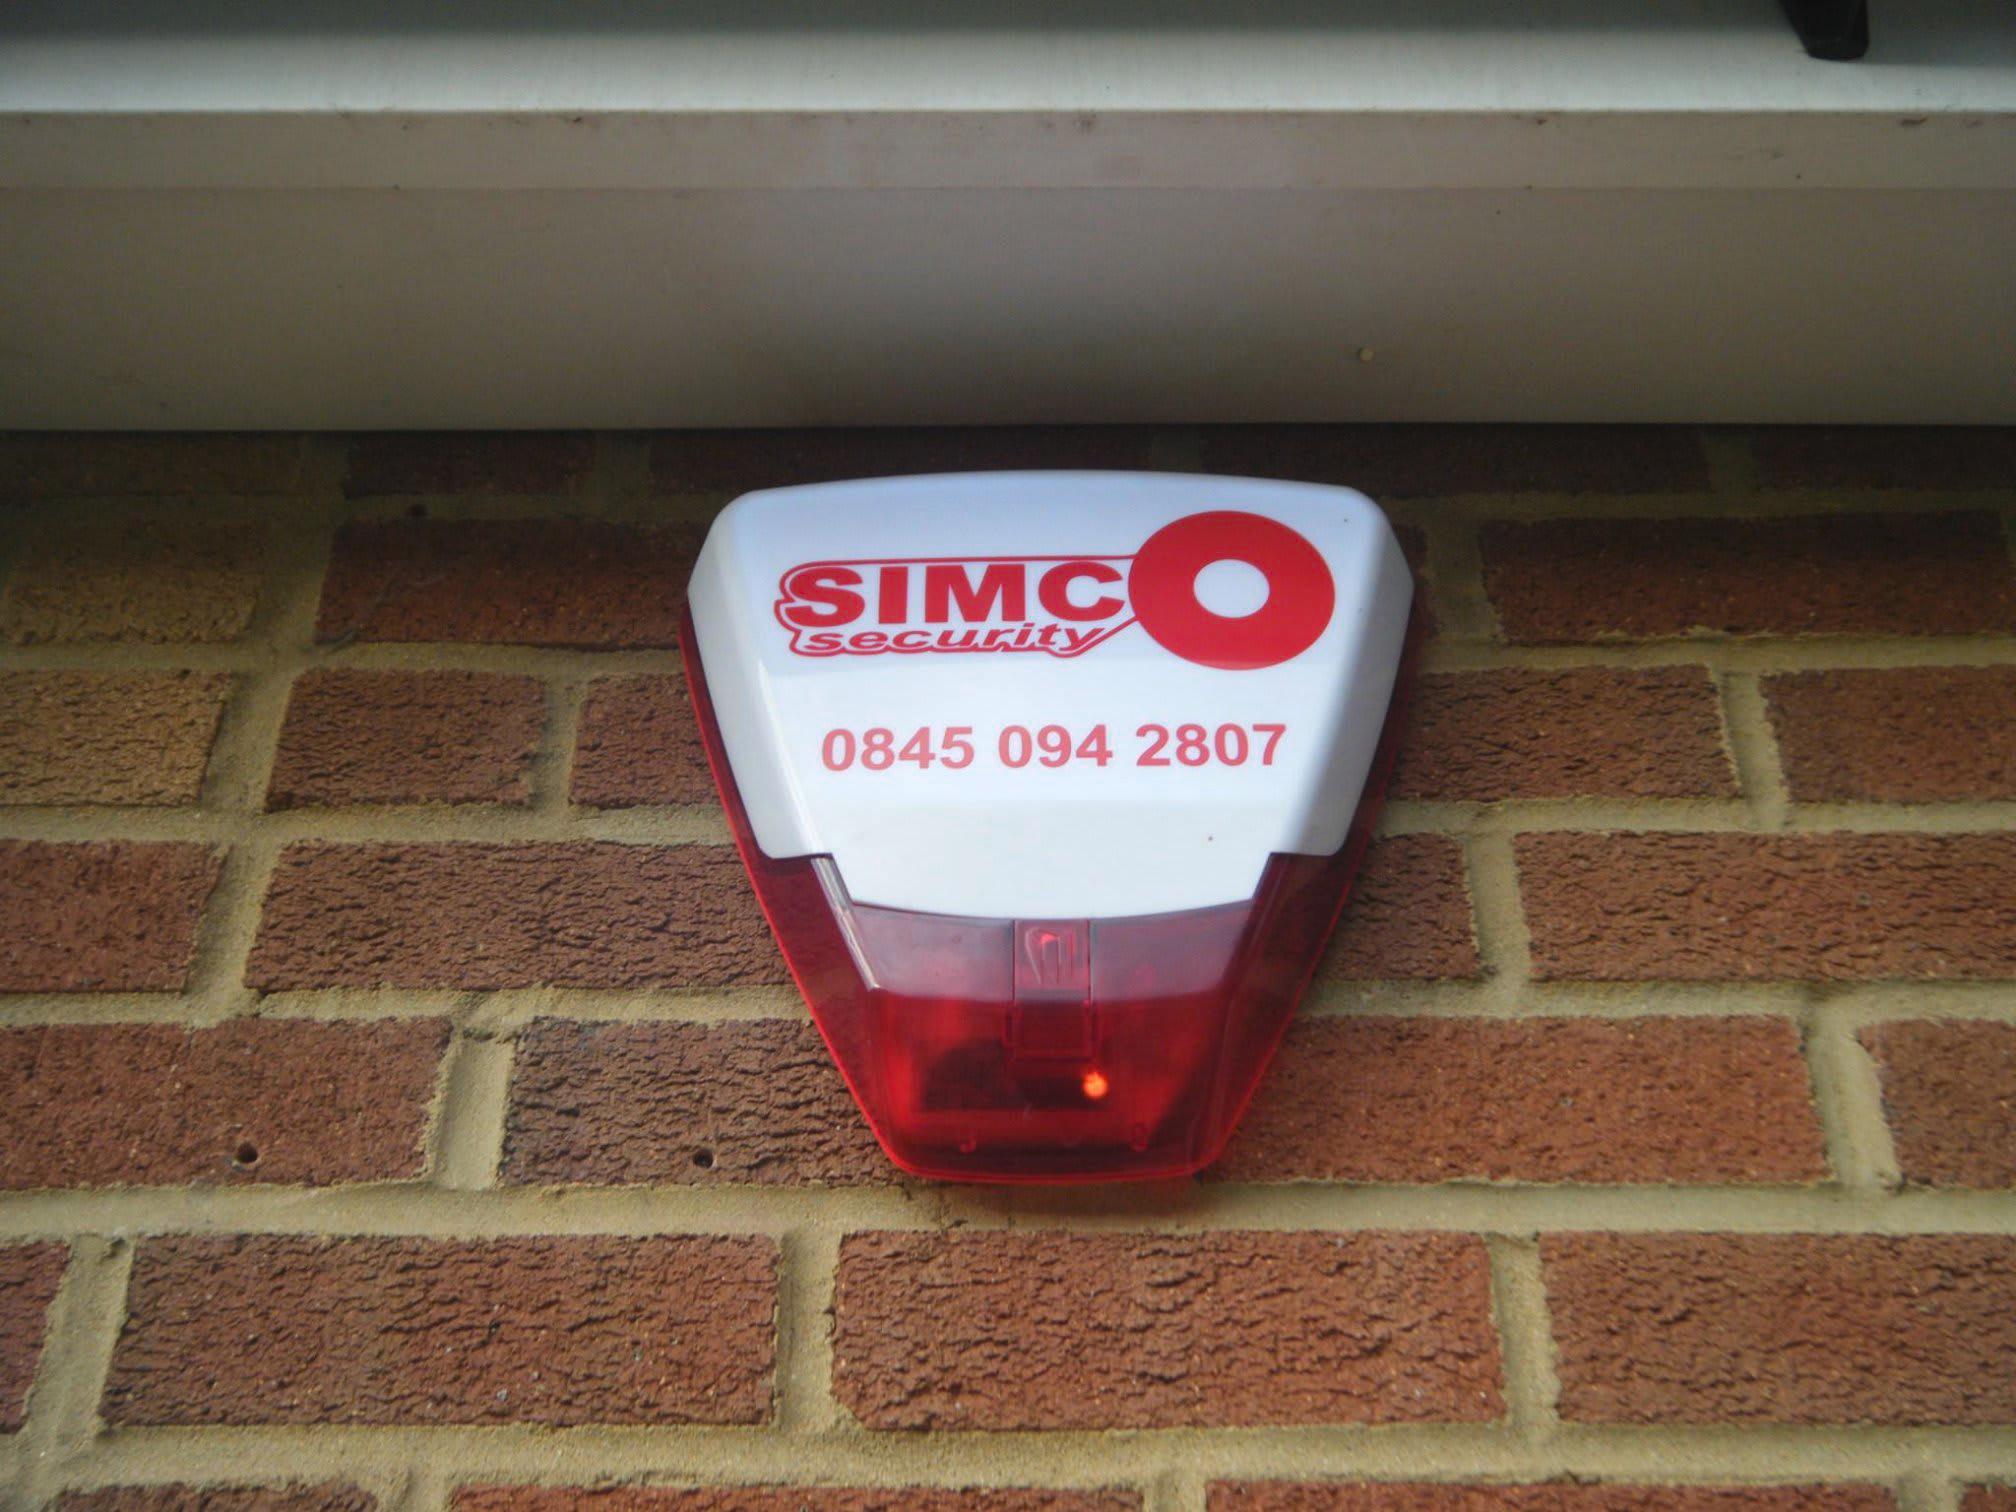 Images Simco Security Ltd